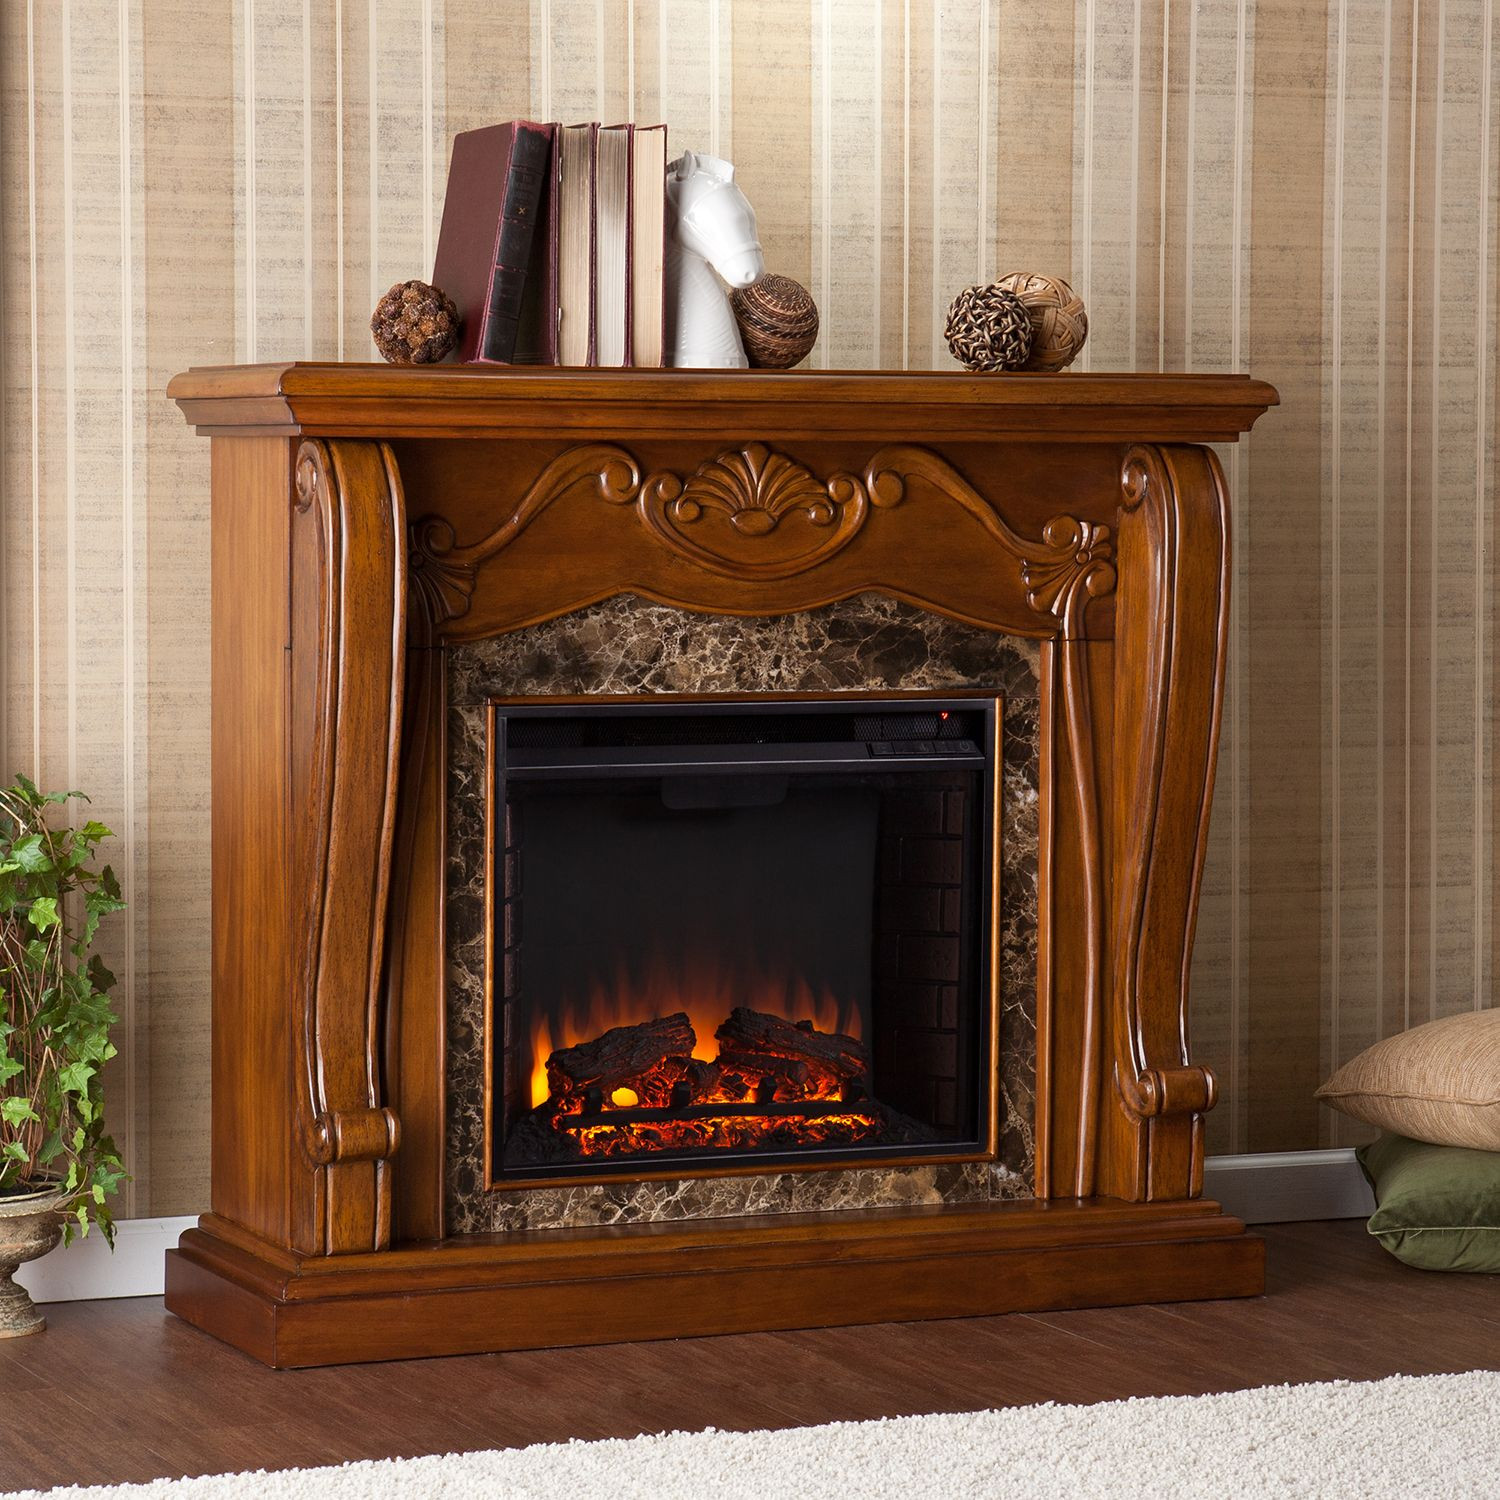 Electric Fireplace Decor
 Electric Fireplace Designs to Warm the Heart